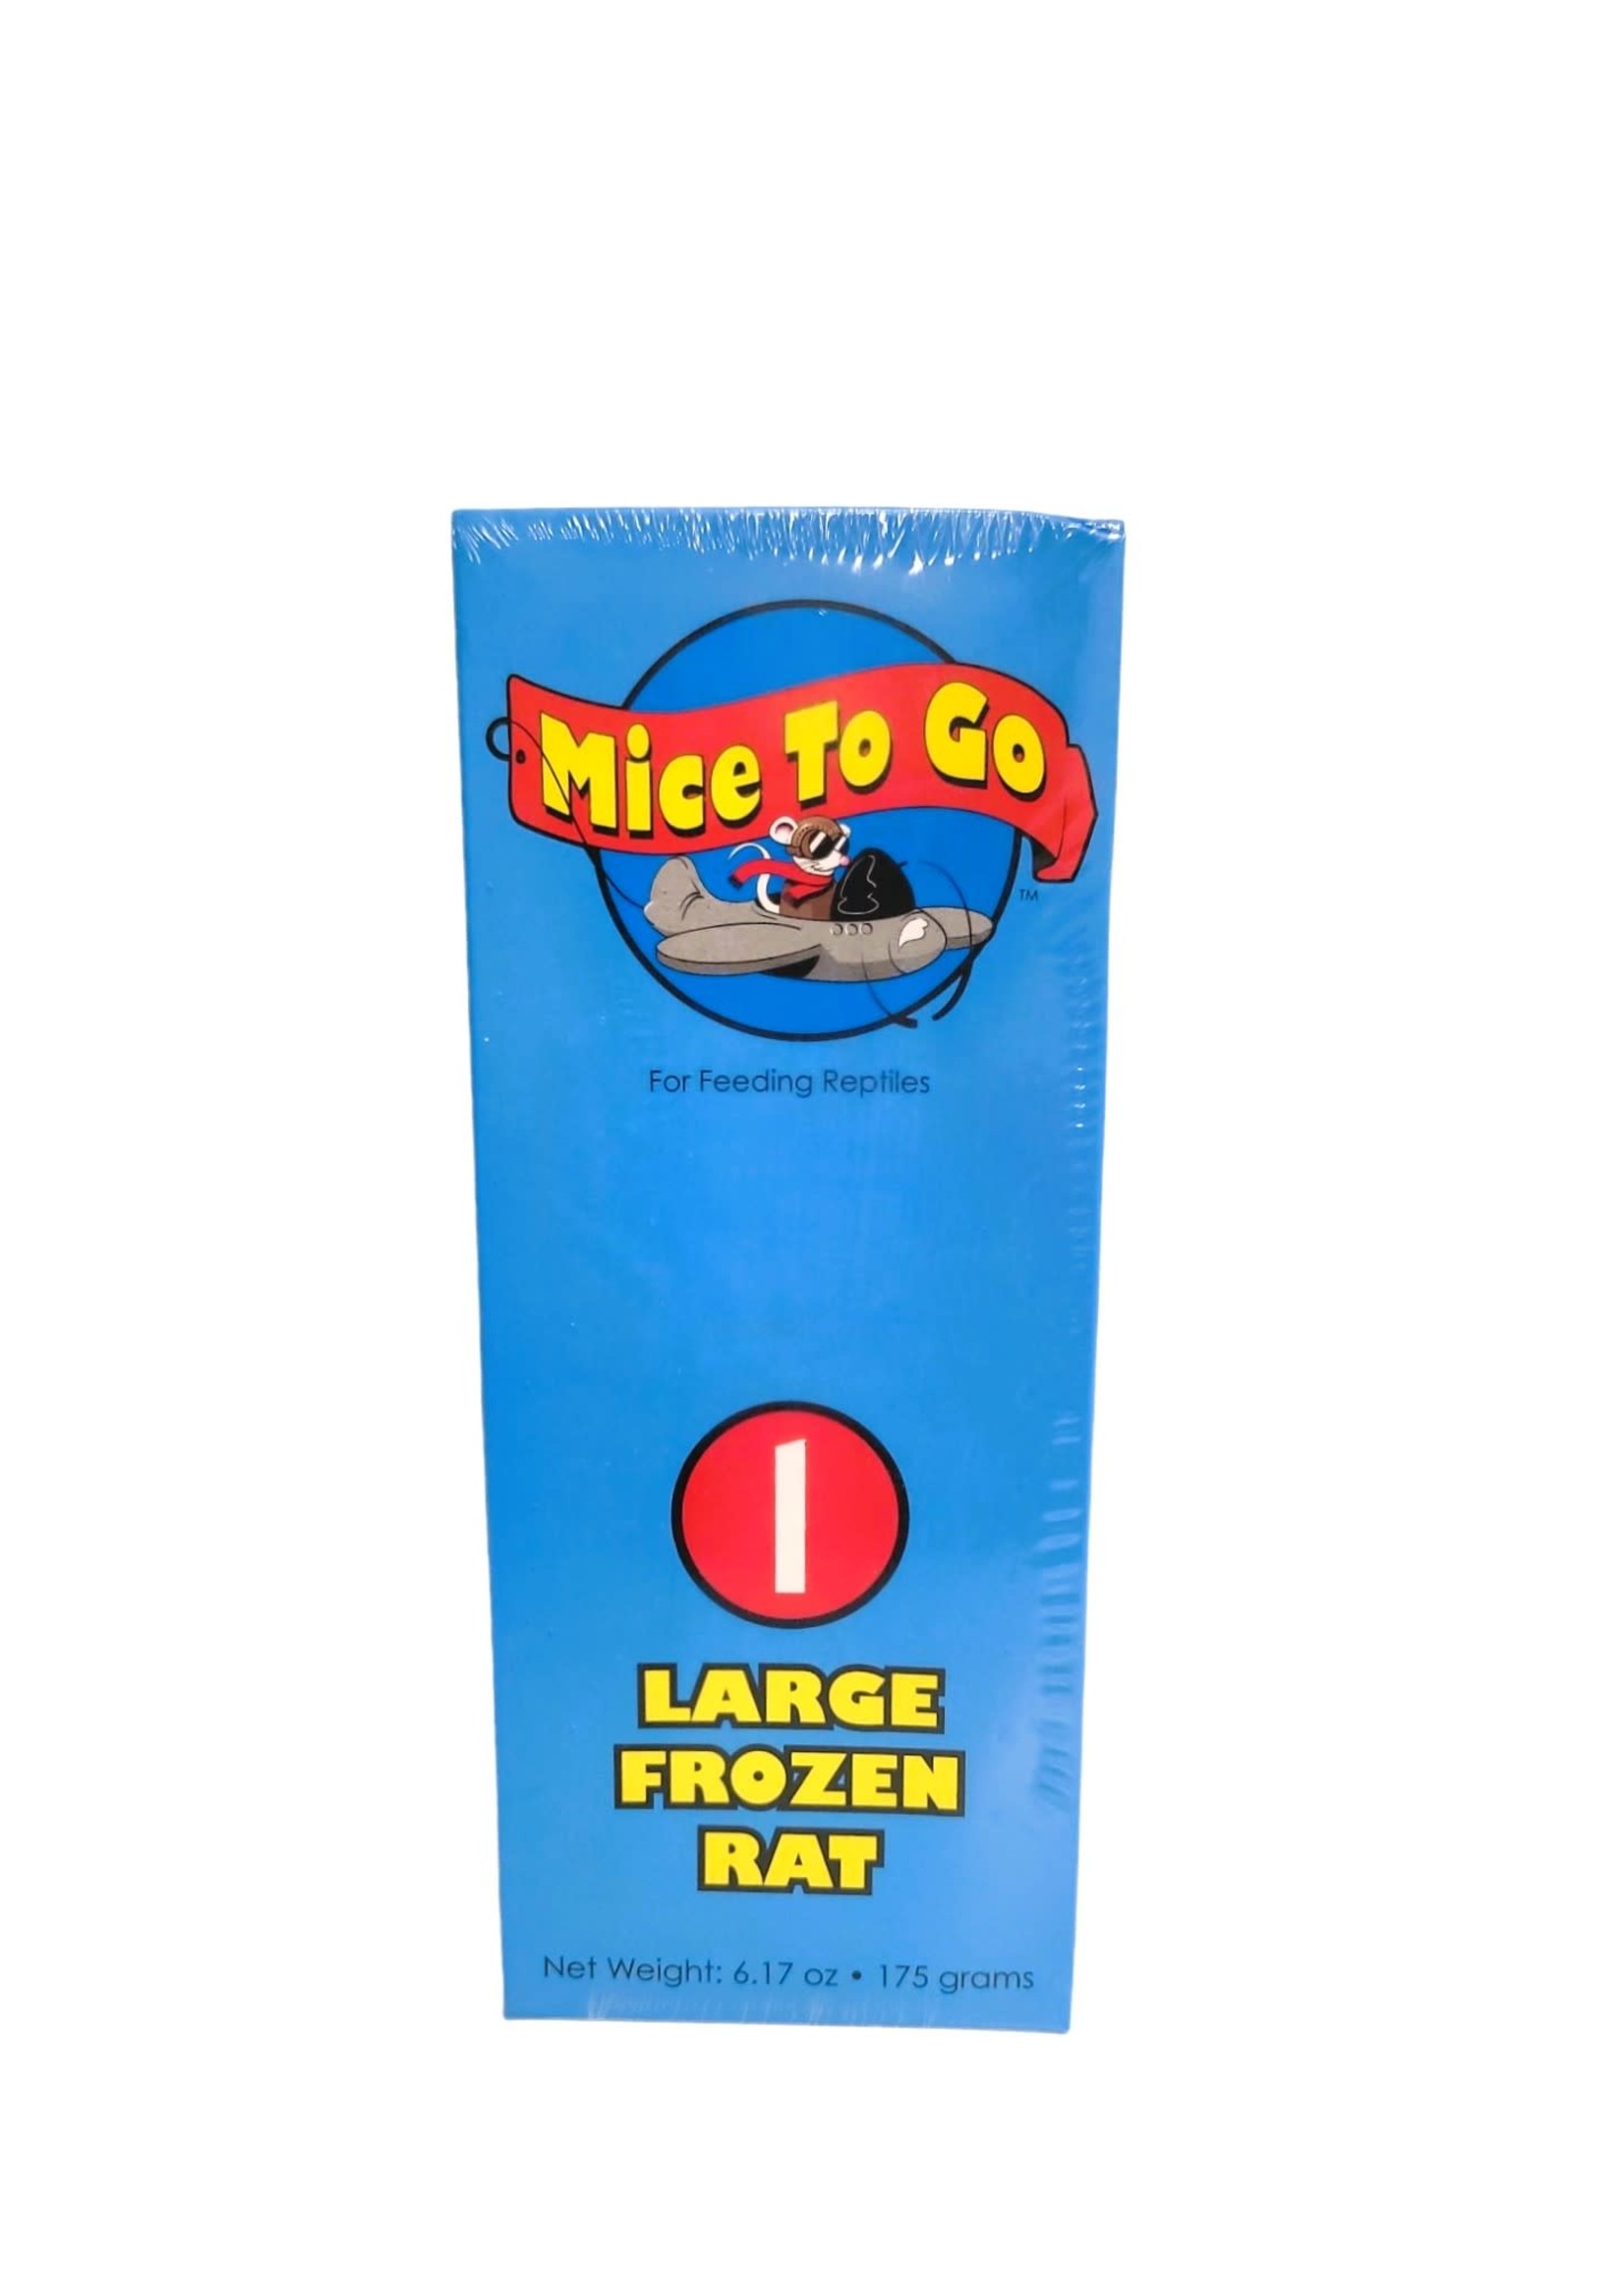 Mice to Go Frozen Large Rat 1 Pack